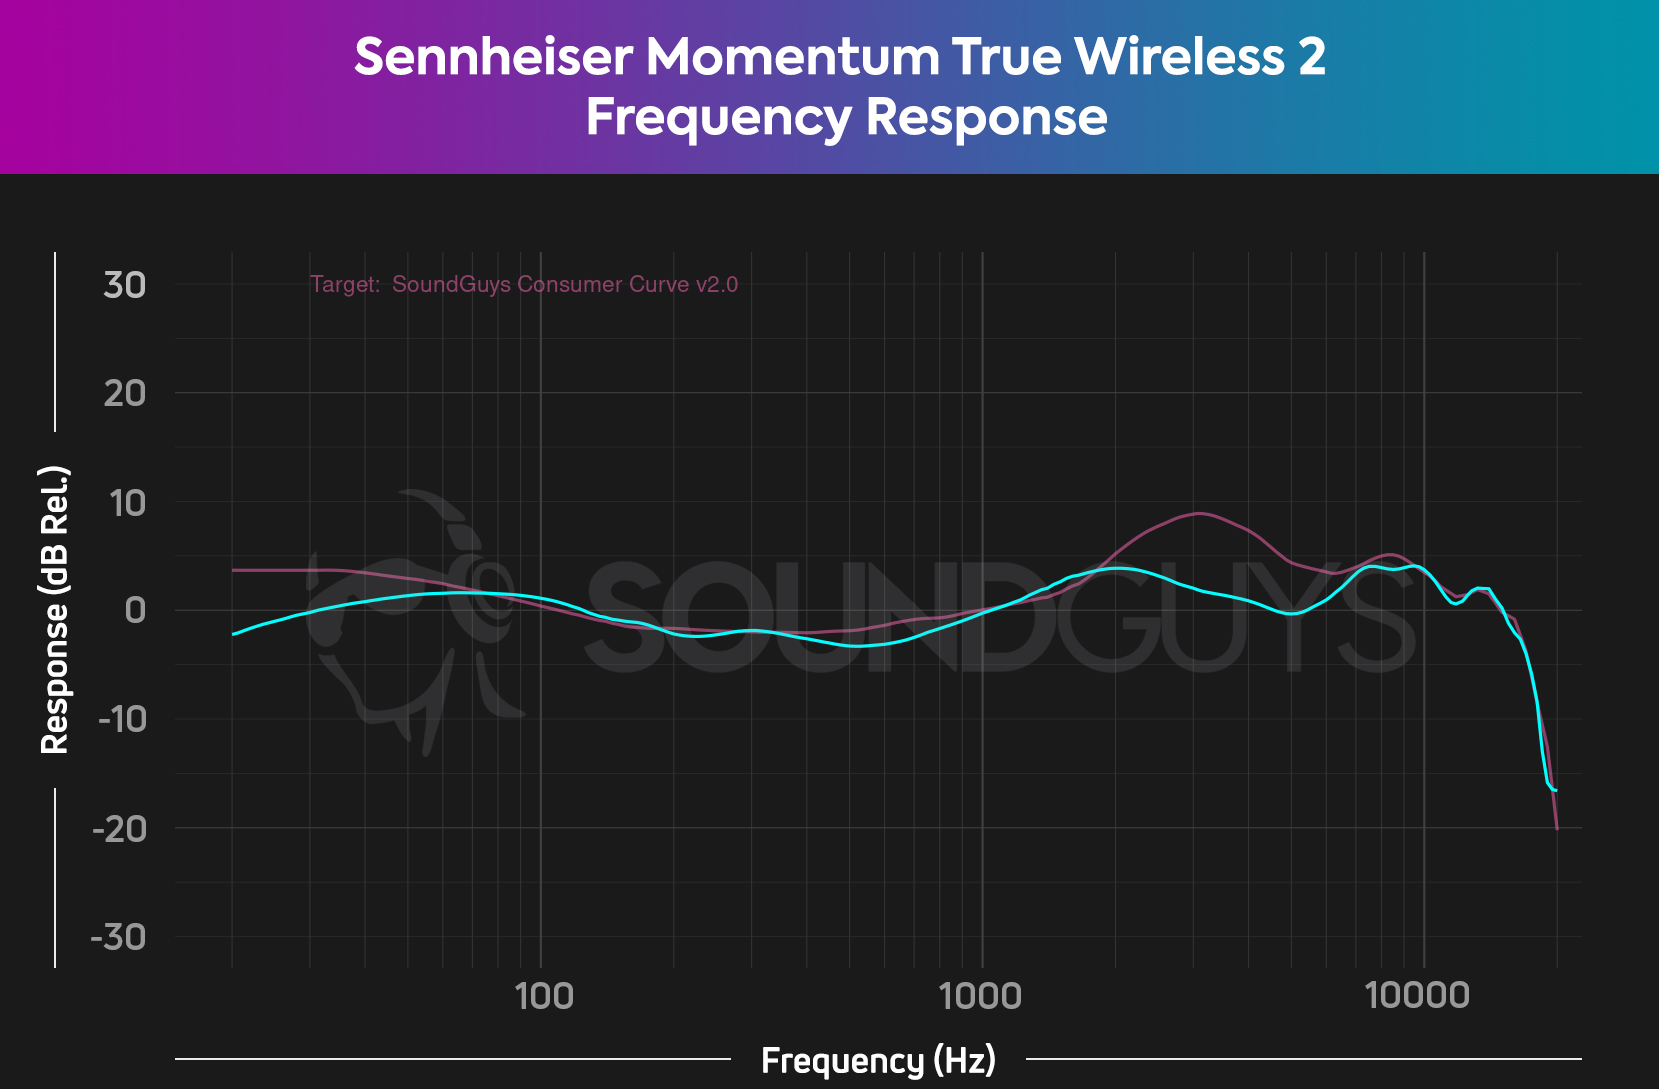 A chart depicts the Sennheiser MOMENTUM True Wireless 2 (cyan) frequency response compared to the SoundGuys Consumer Curve V2.0 (pink), showing decent compliance with the target curve, but with a small under-emphasis in the highs.